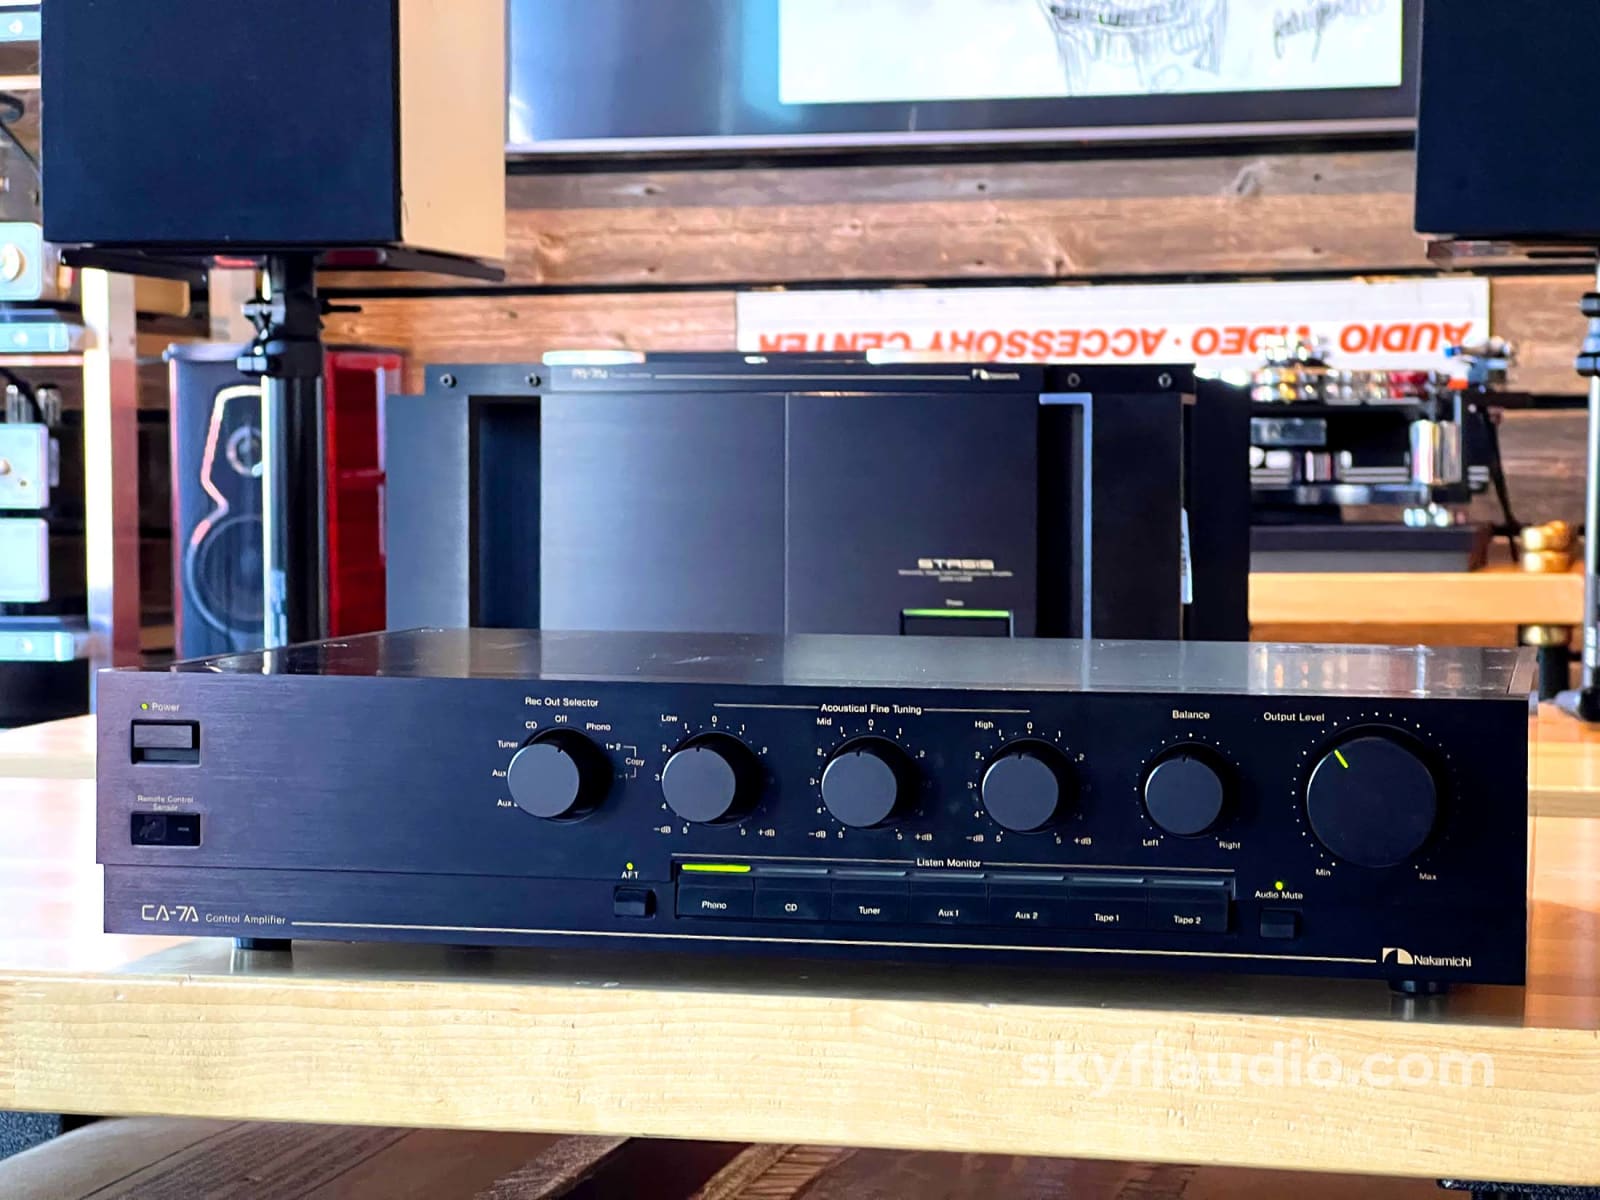 Nakamichi Ca-7A Vintage Analog Preamplifier With Mc/Mm Phono - See Video